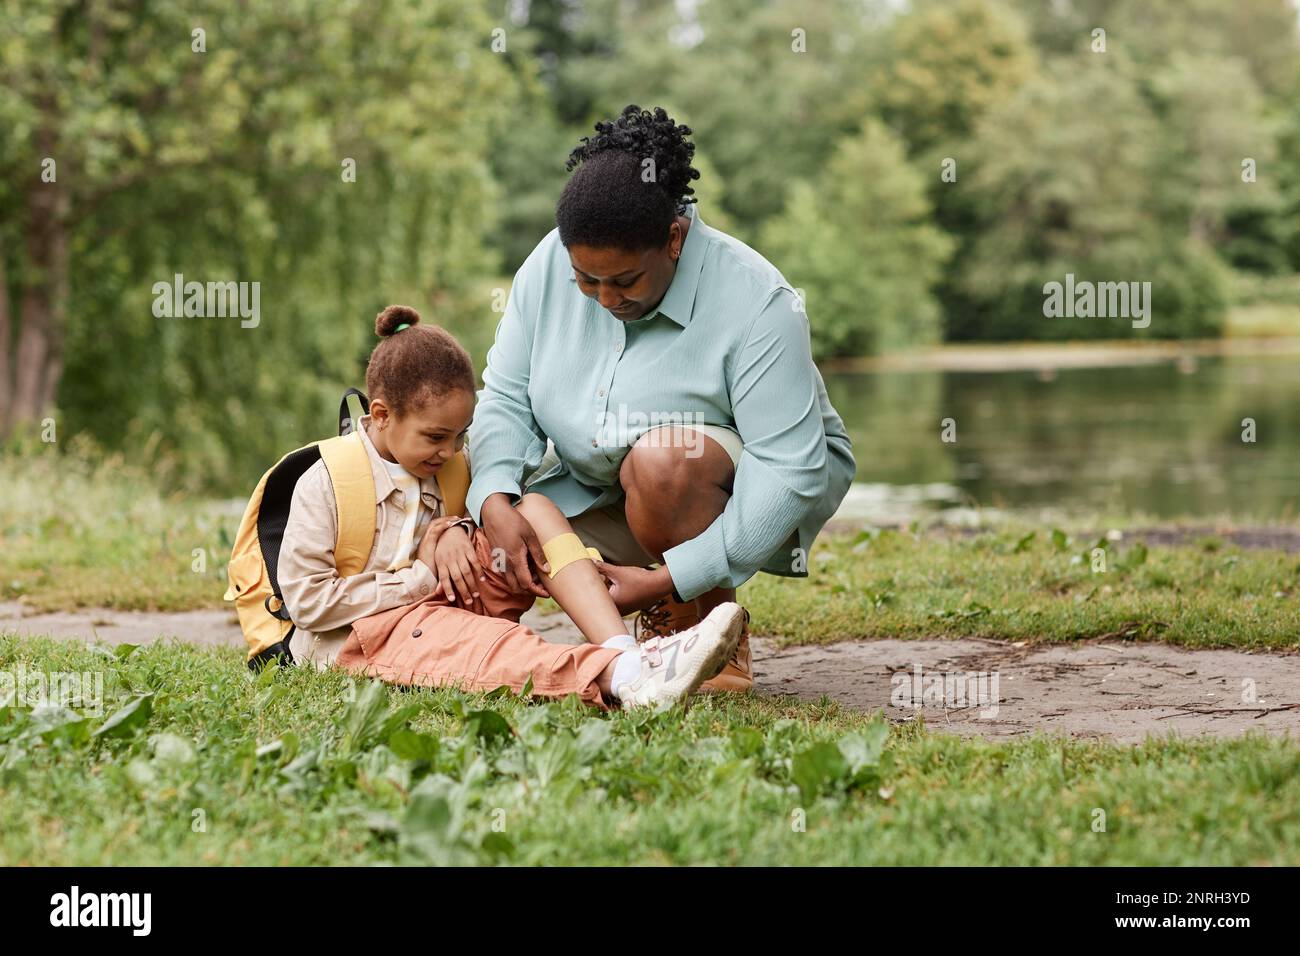 Portrait of caring black mother putting band aid on knee of little girl injured during nature hike, copy space Stock Photo